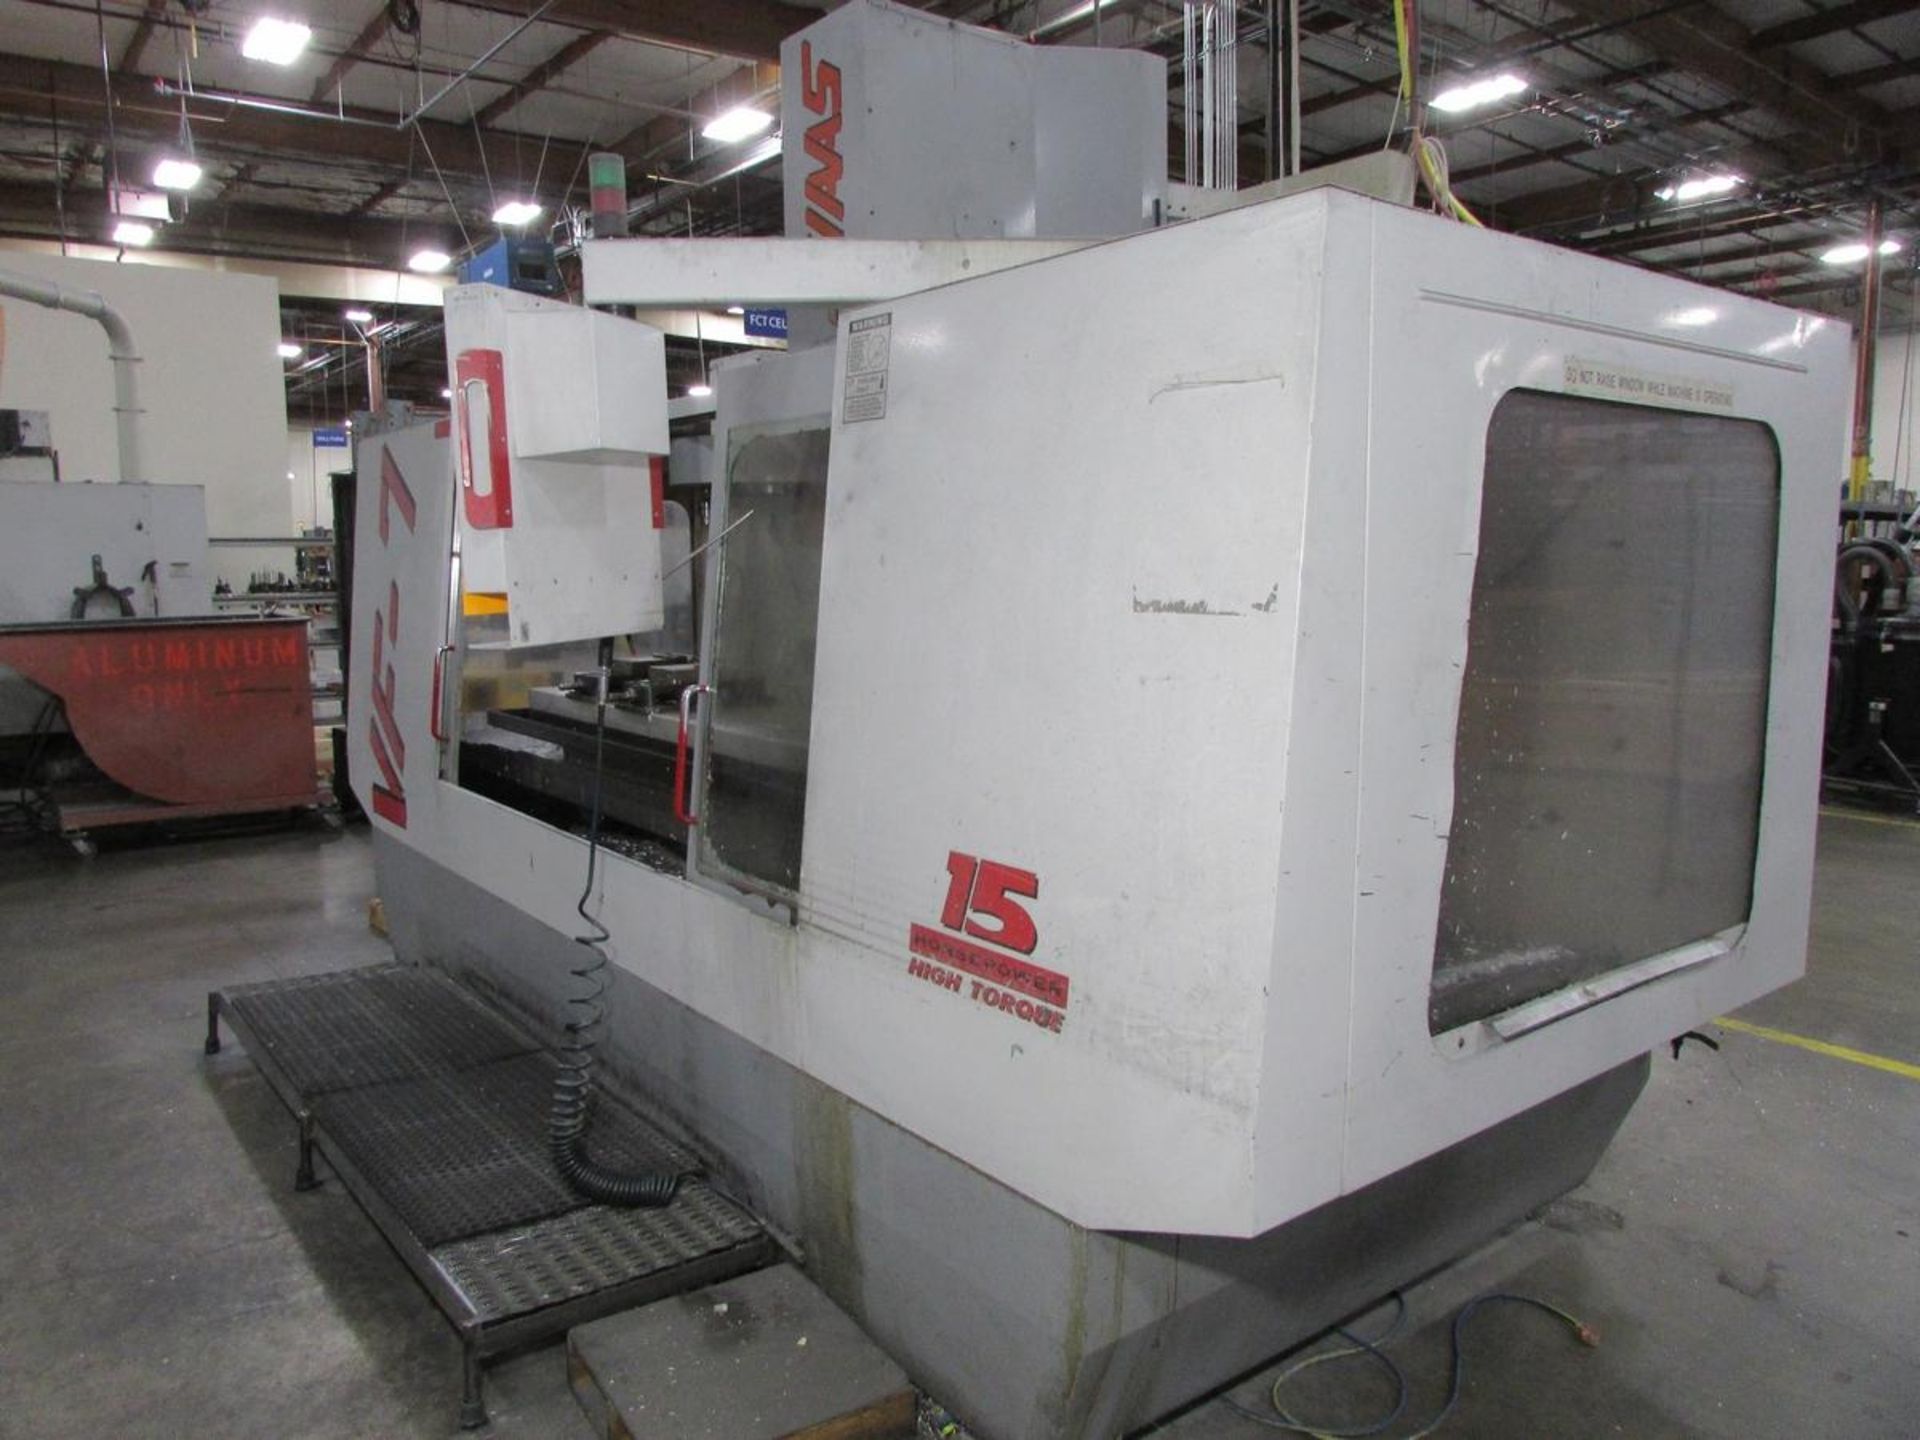 1997 Haas VF-7 4-Axis CNC Vertical Maching Center - Image 3 of 30